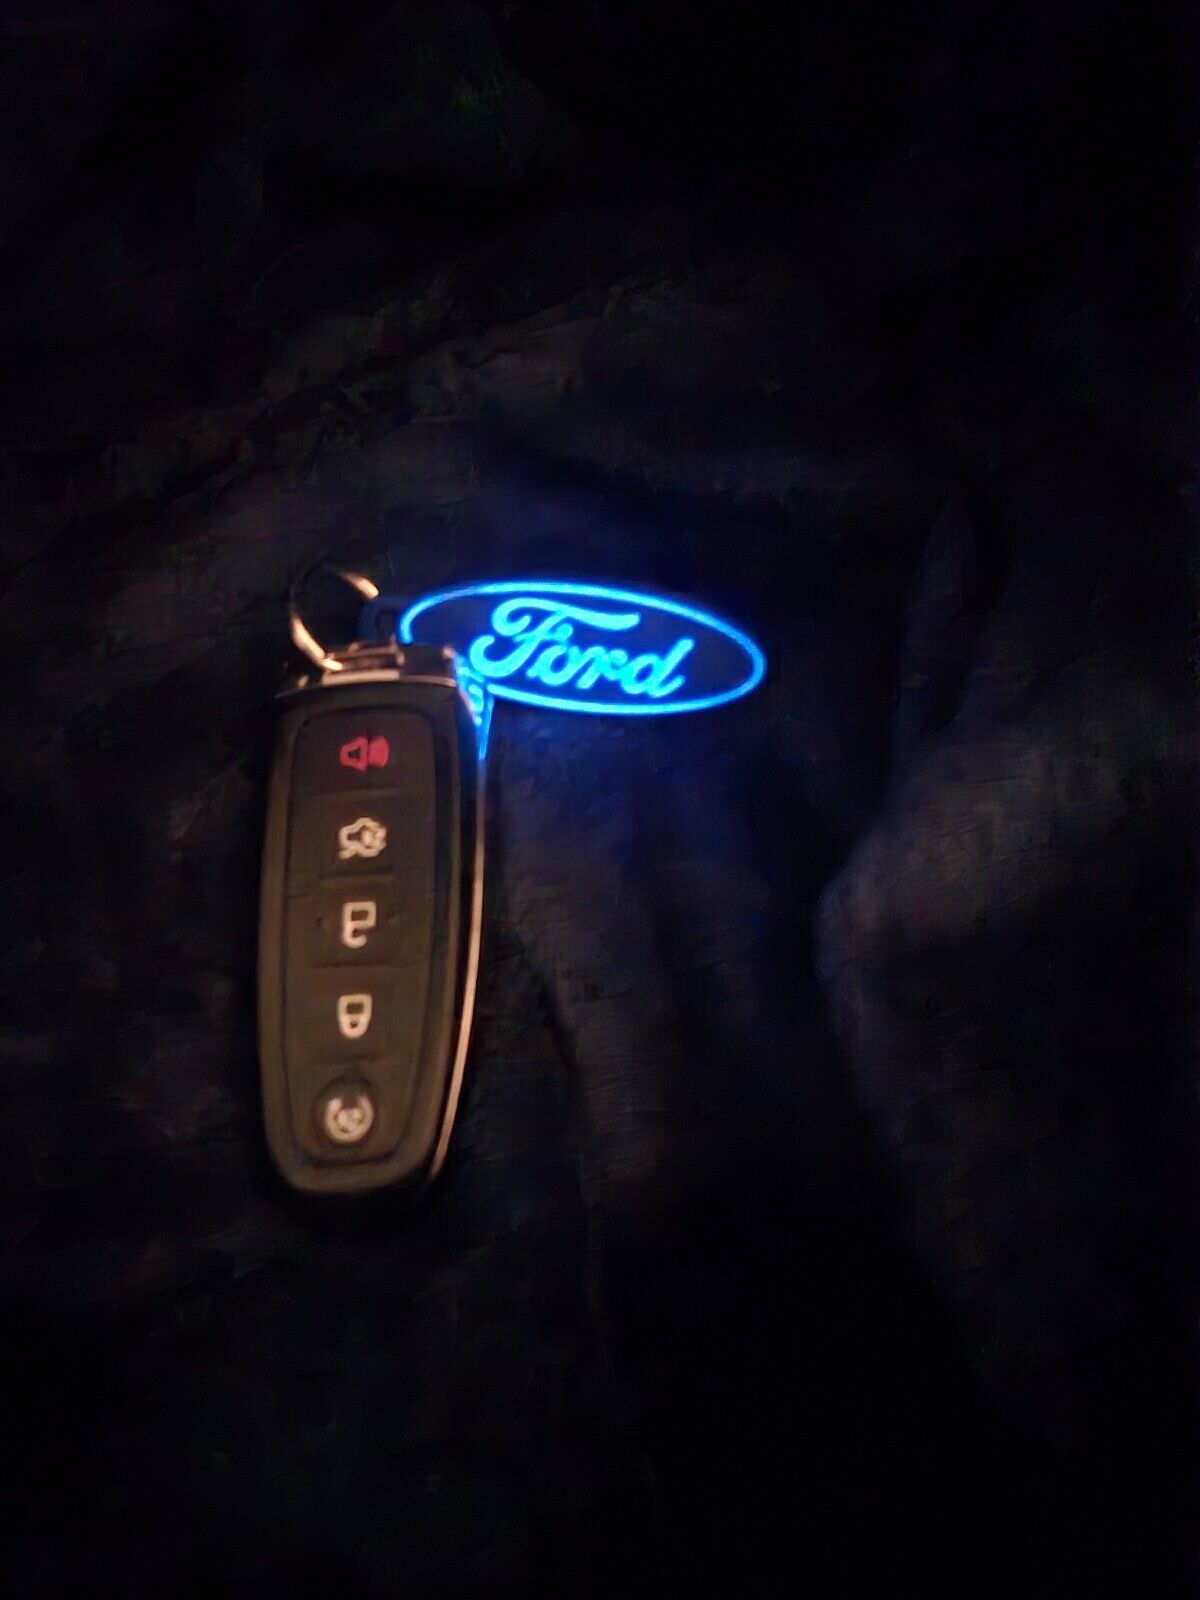 Ford Blue And White Keychain, Glow In The Dark, 3D Printed